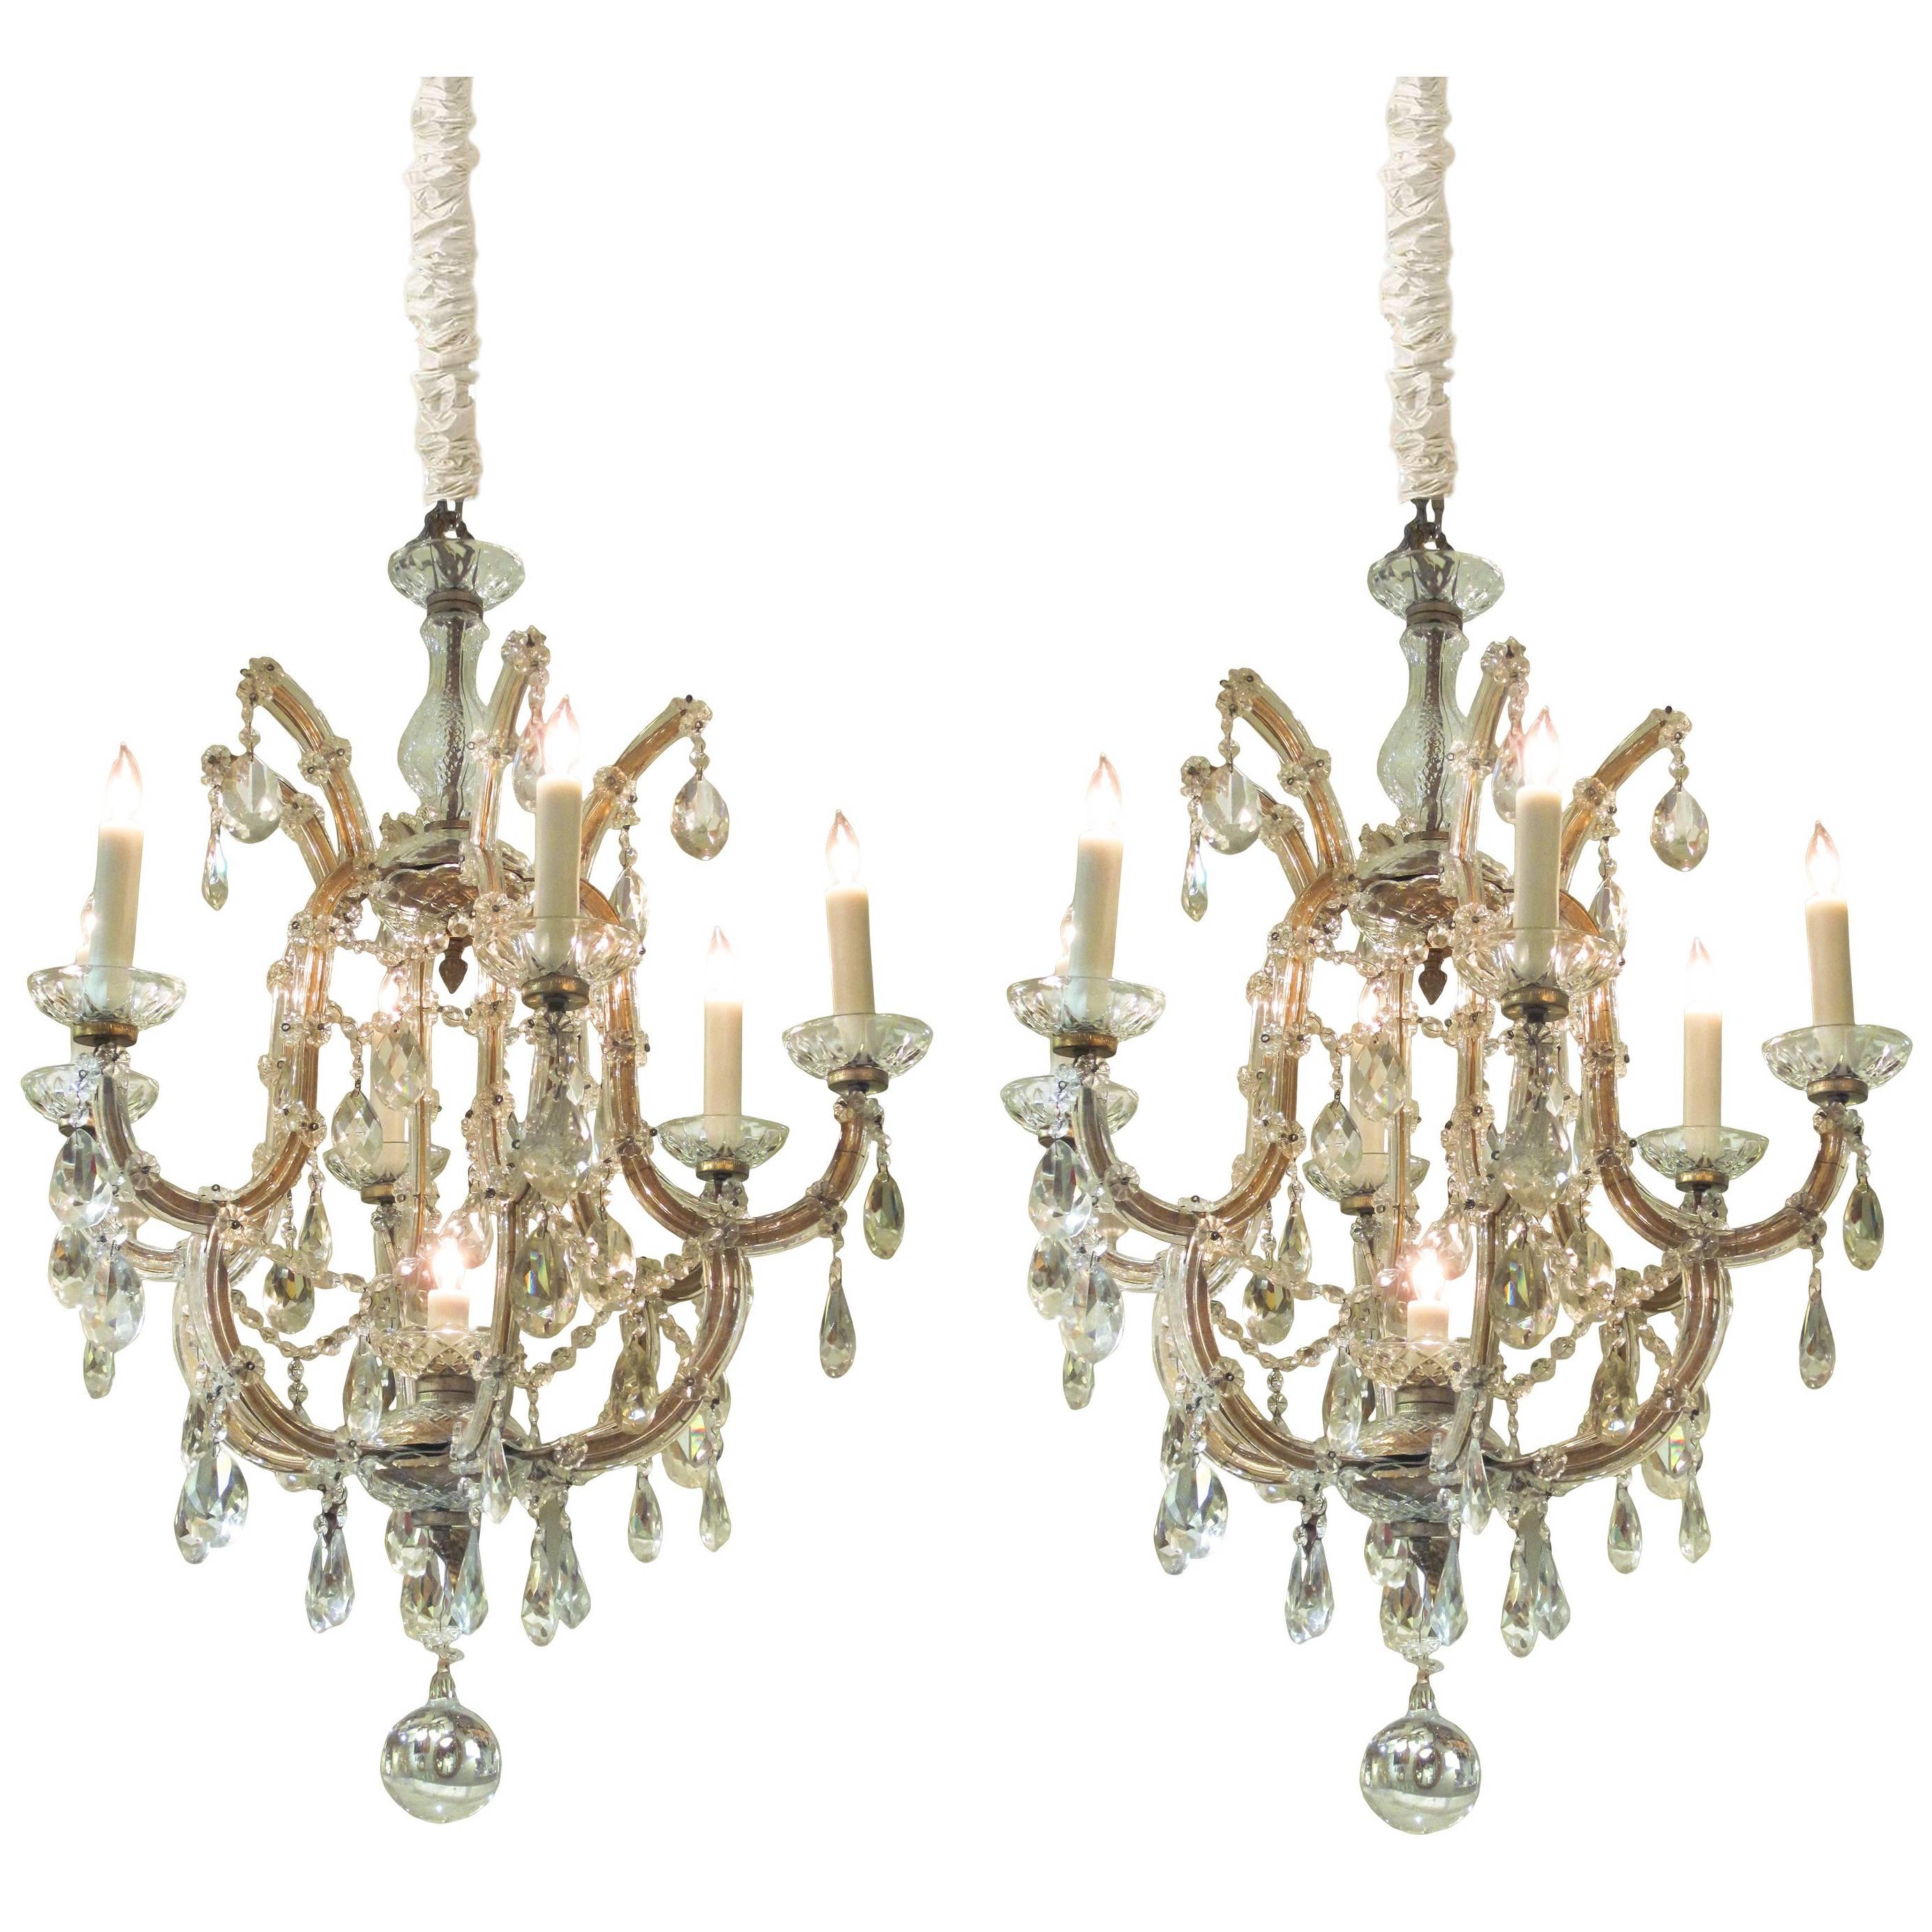 A good pair of continental Maria Theresa basket-form glass and crystal six-light chandeliers; possibly Viennese; composed of hand-forged gilt-metal frames sheathed in glass; emanating 6 scrolled candle-arms with a central light within the fixture.